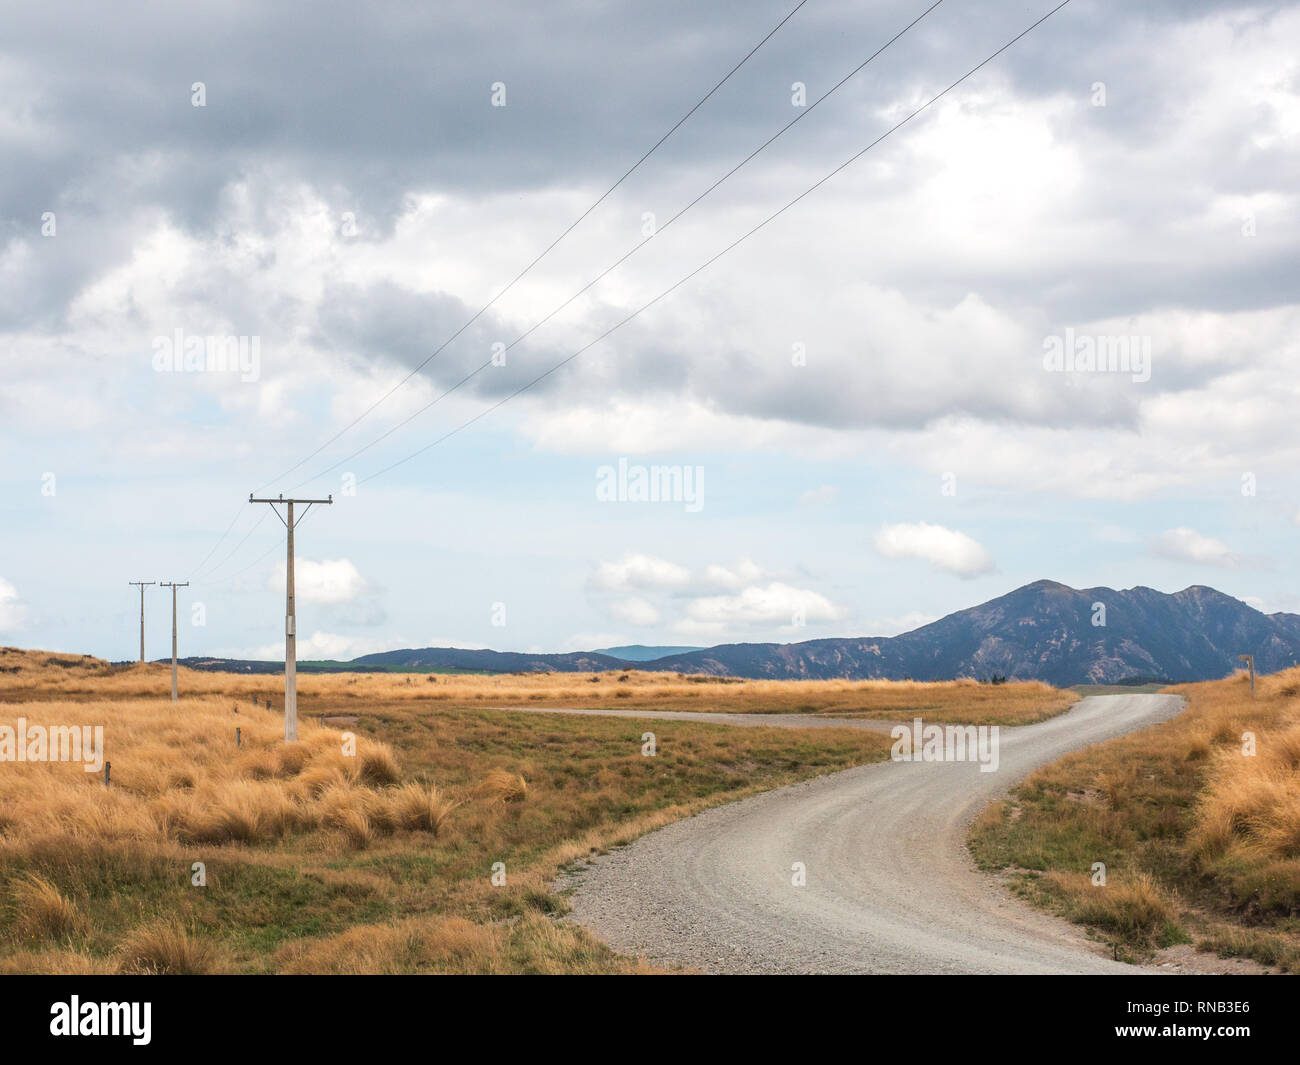 Power poles lines on bend of an unsealed gravel road, tussock country, Ngamatea Station, Inland Mokai Patea, Central North Island, New Zealand Stock Photo